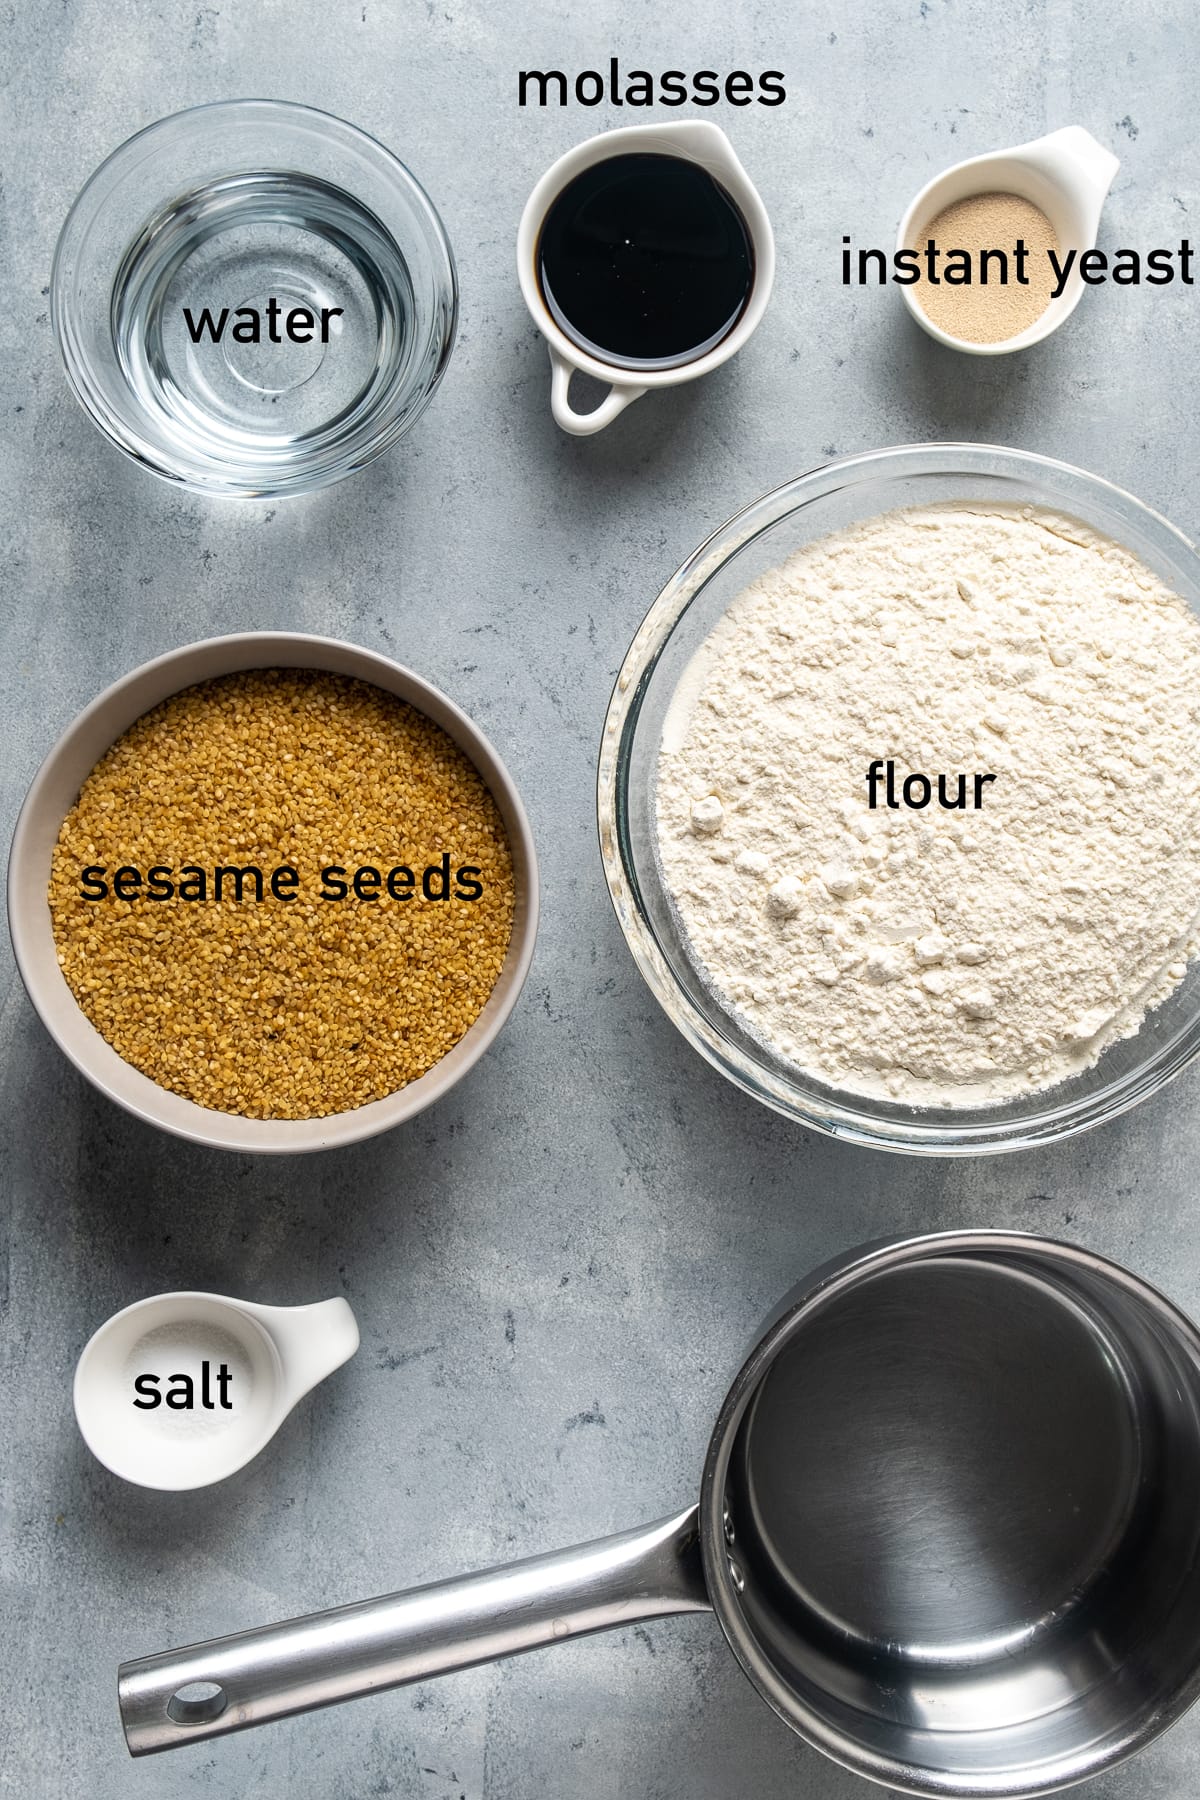 Sesame seeds, flour, grape molasses, instant yeast, water and salt all in separate bowls on a grey background.